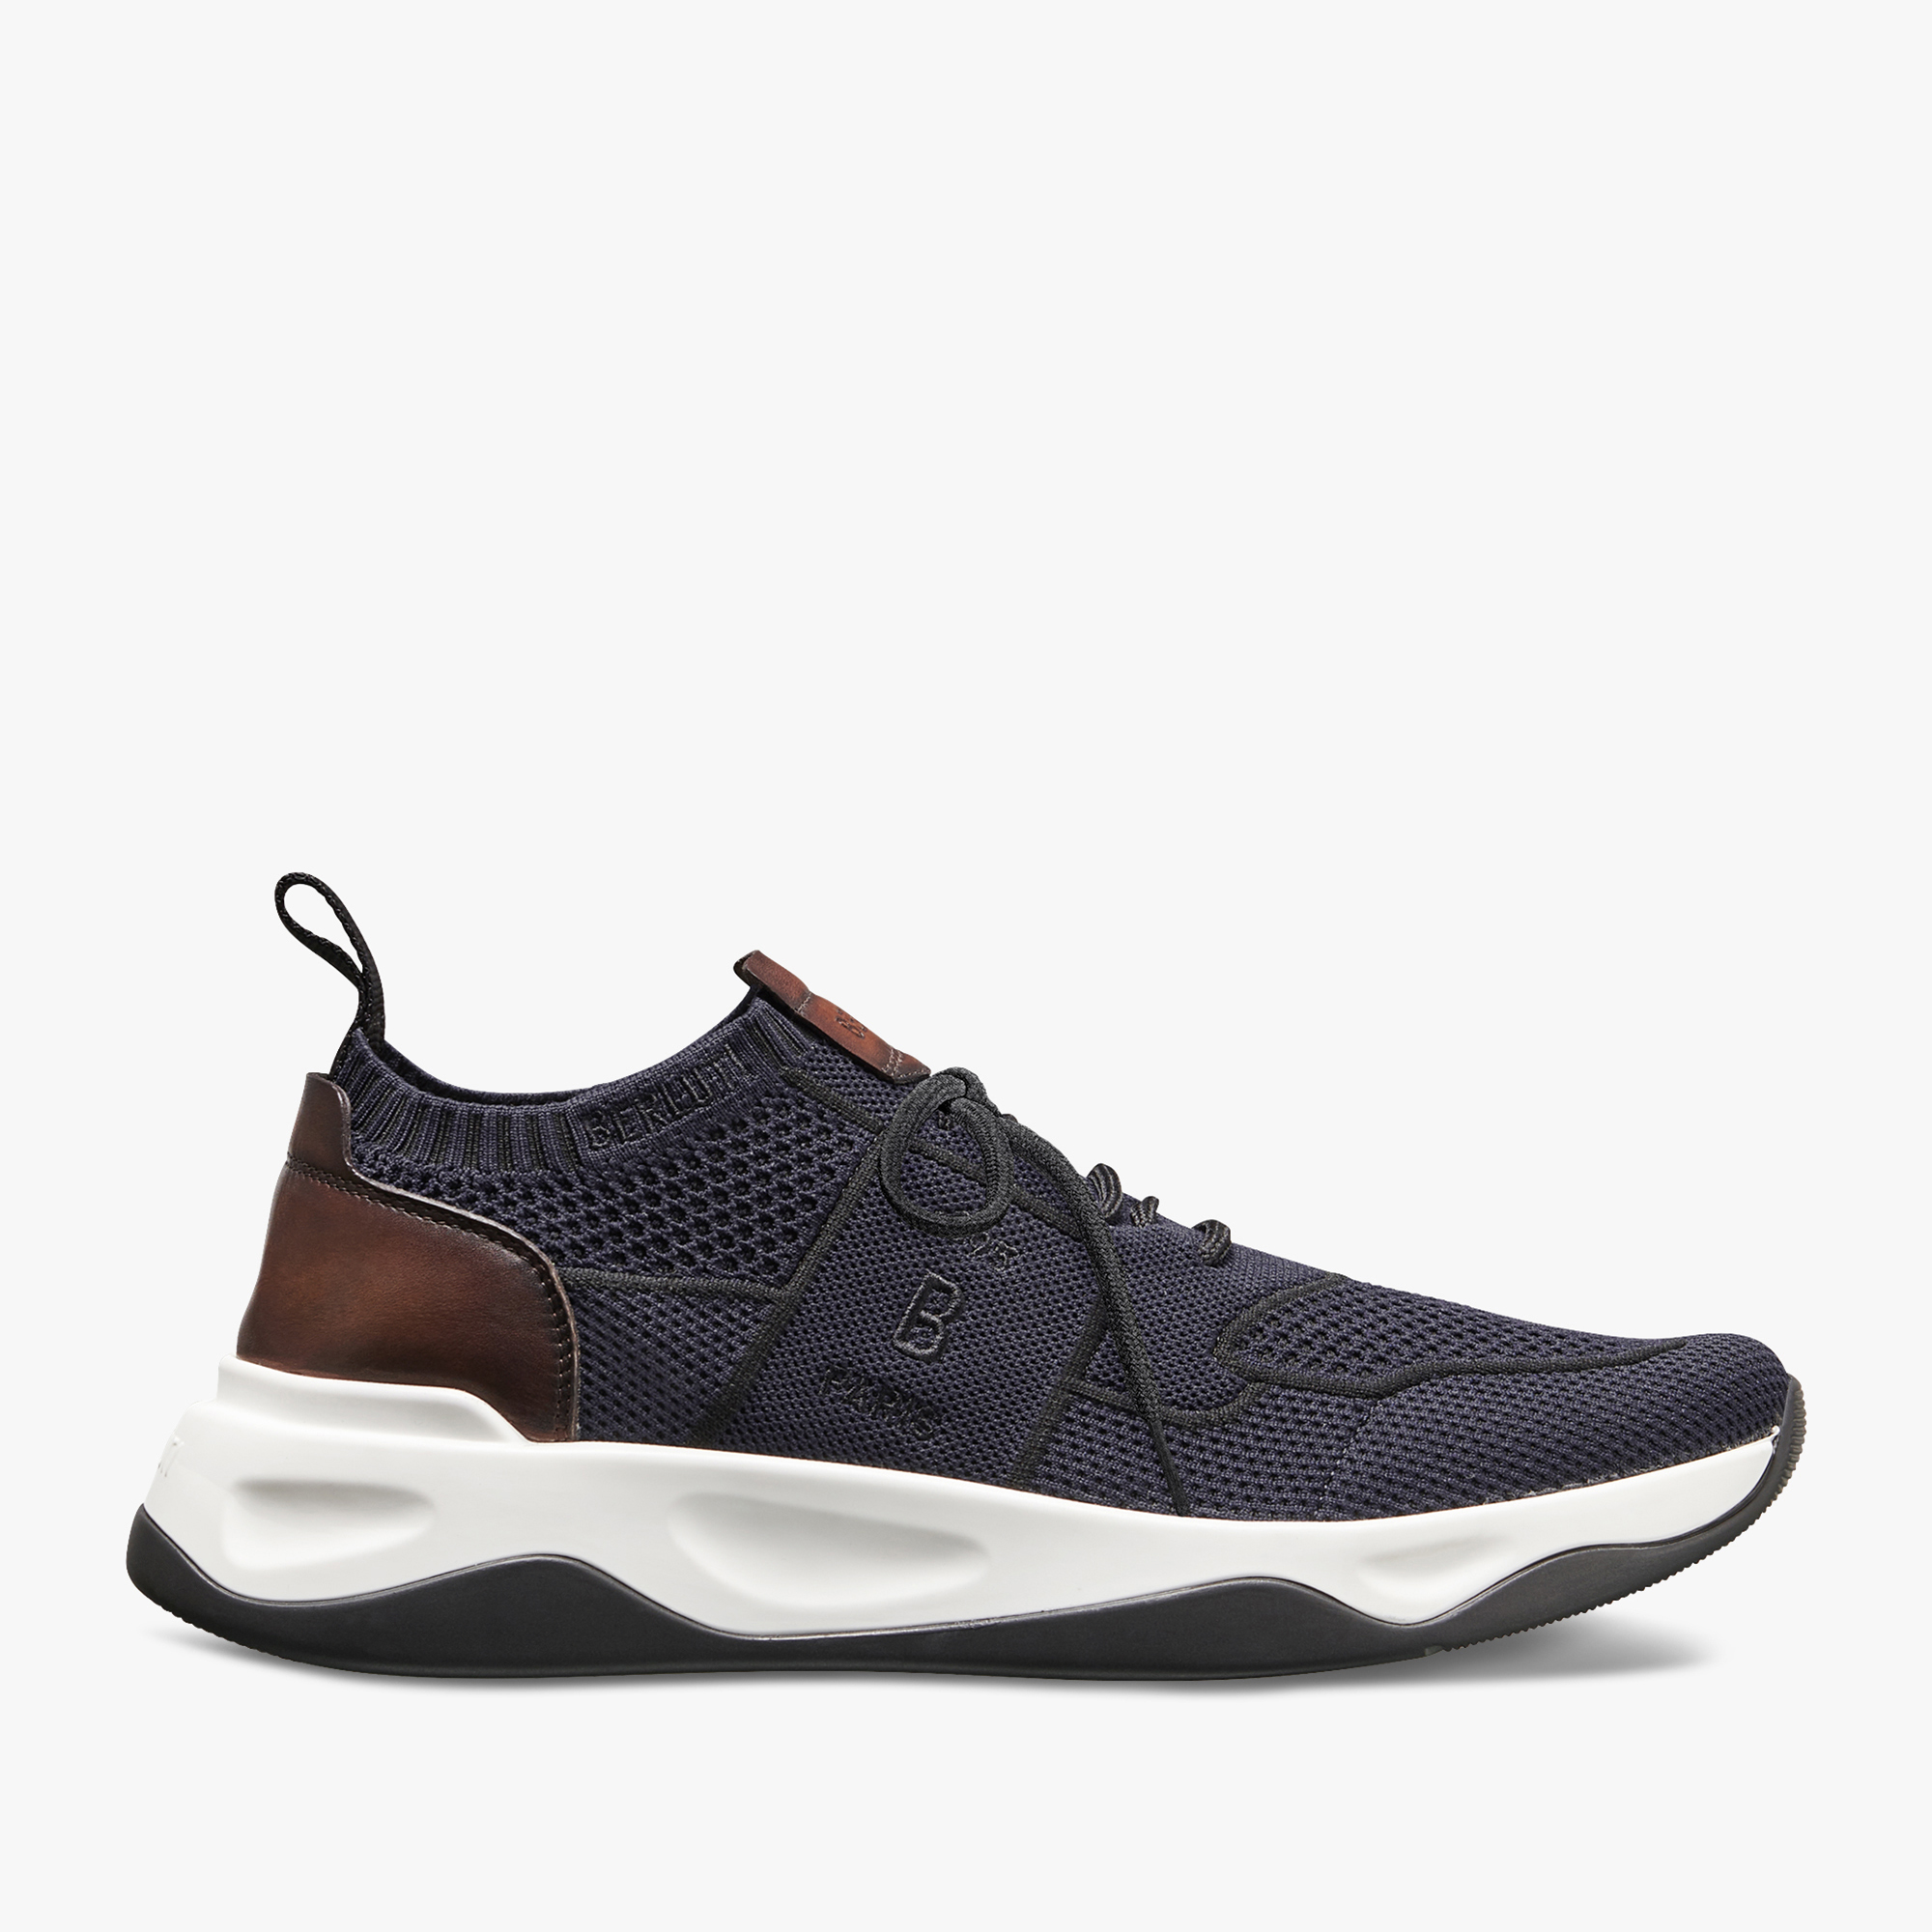 Shadow Knit Sneaker With Leather Details, NAVY, hi-res